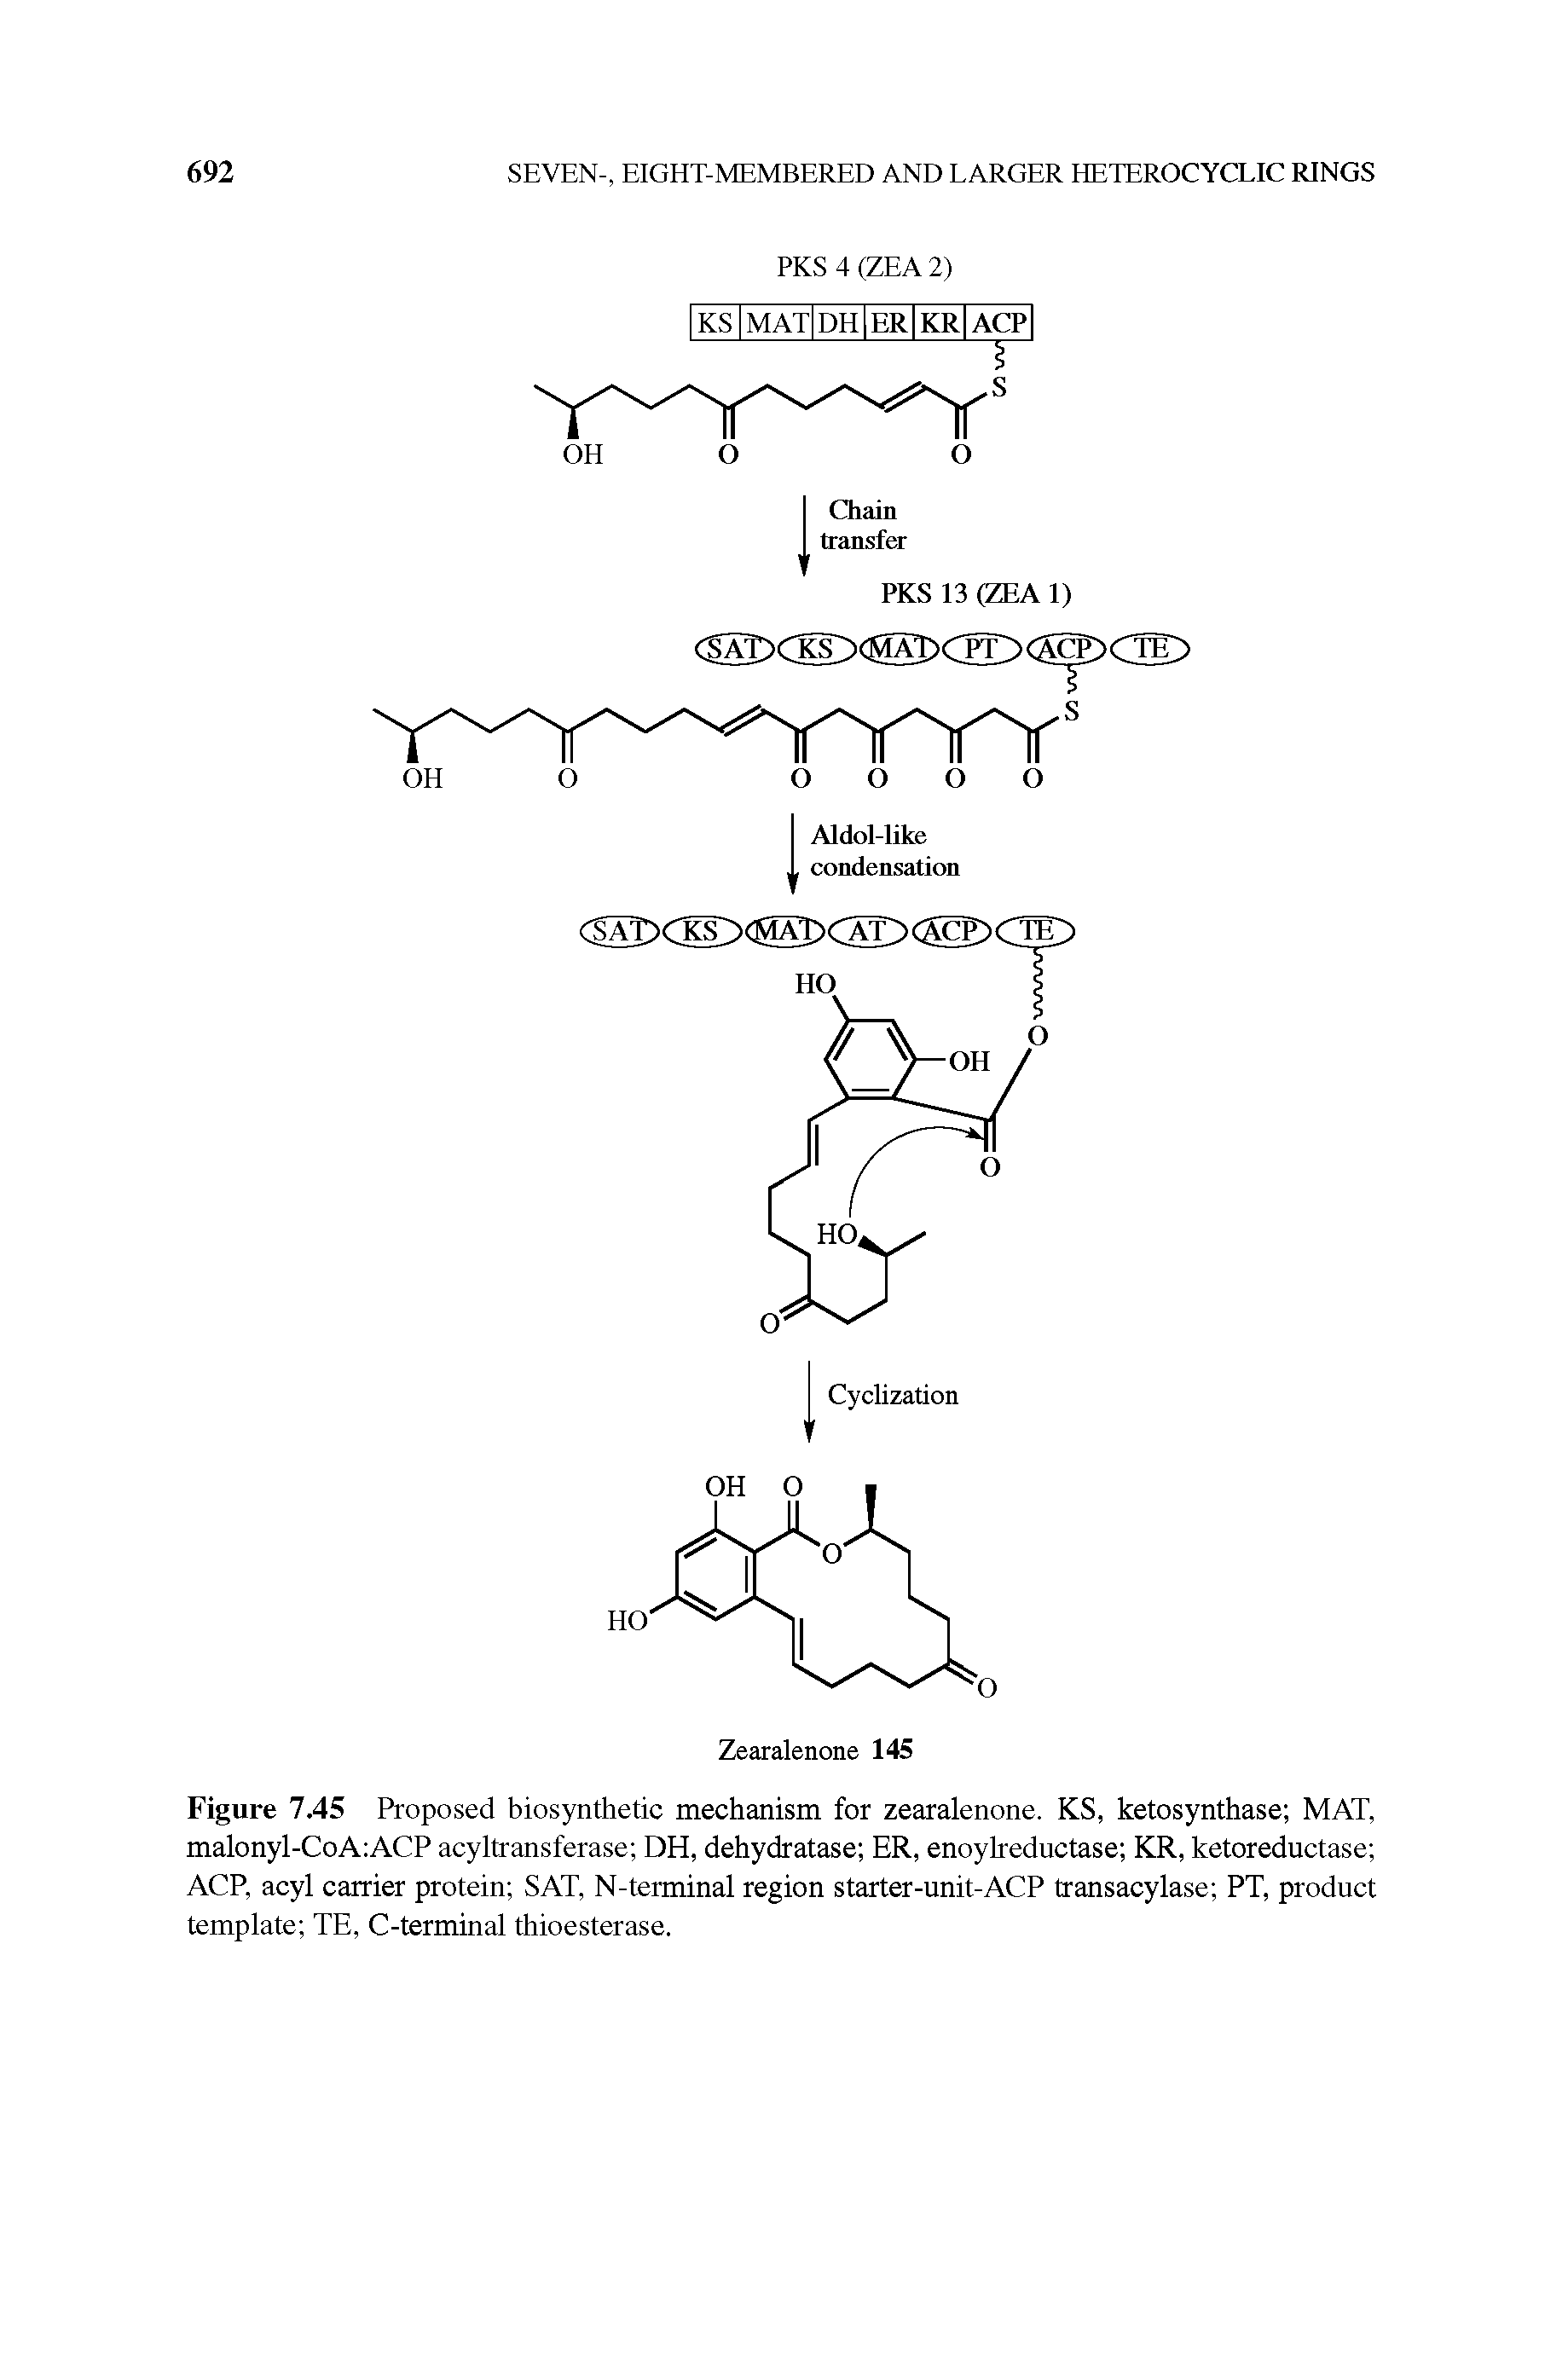 Figure 7.45 Proposed biosynthetic mechanism for zearalenone. KS, ketosynthase MAT, malonyl-CoA ACP acyltransferase DH, dehydratase ER, enoylreductase KR, ketoreductase ACP, acyl carrier protein SAT, N-terminal region starter-unit-ACP transacylase PT, prodnct template TE, C-terminal thioesterase.